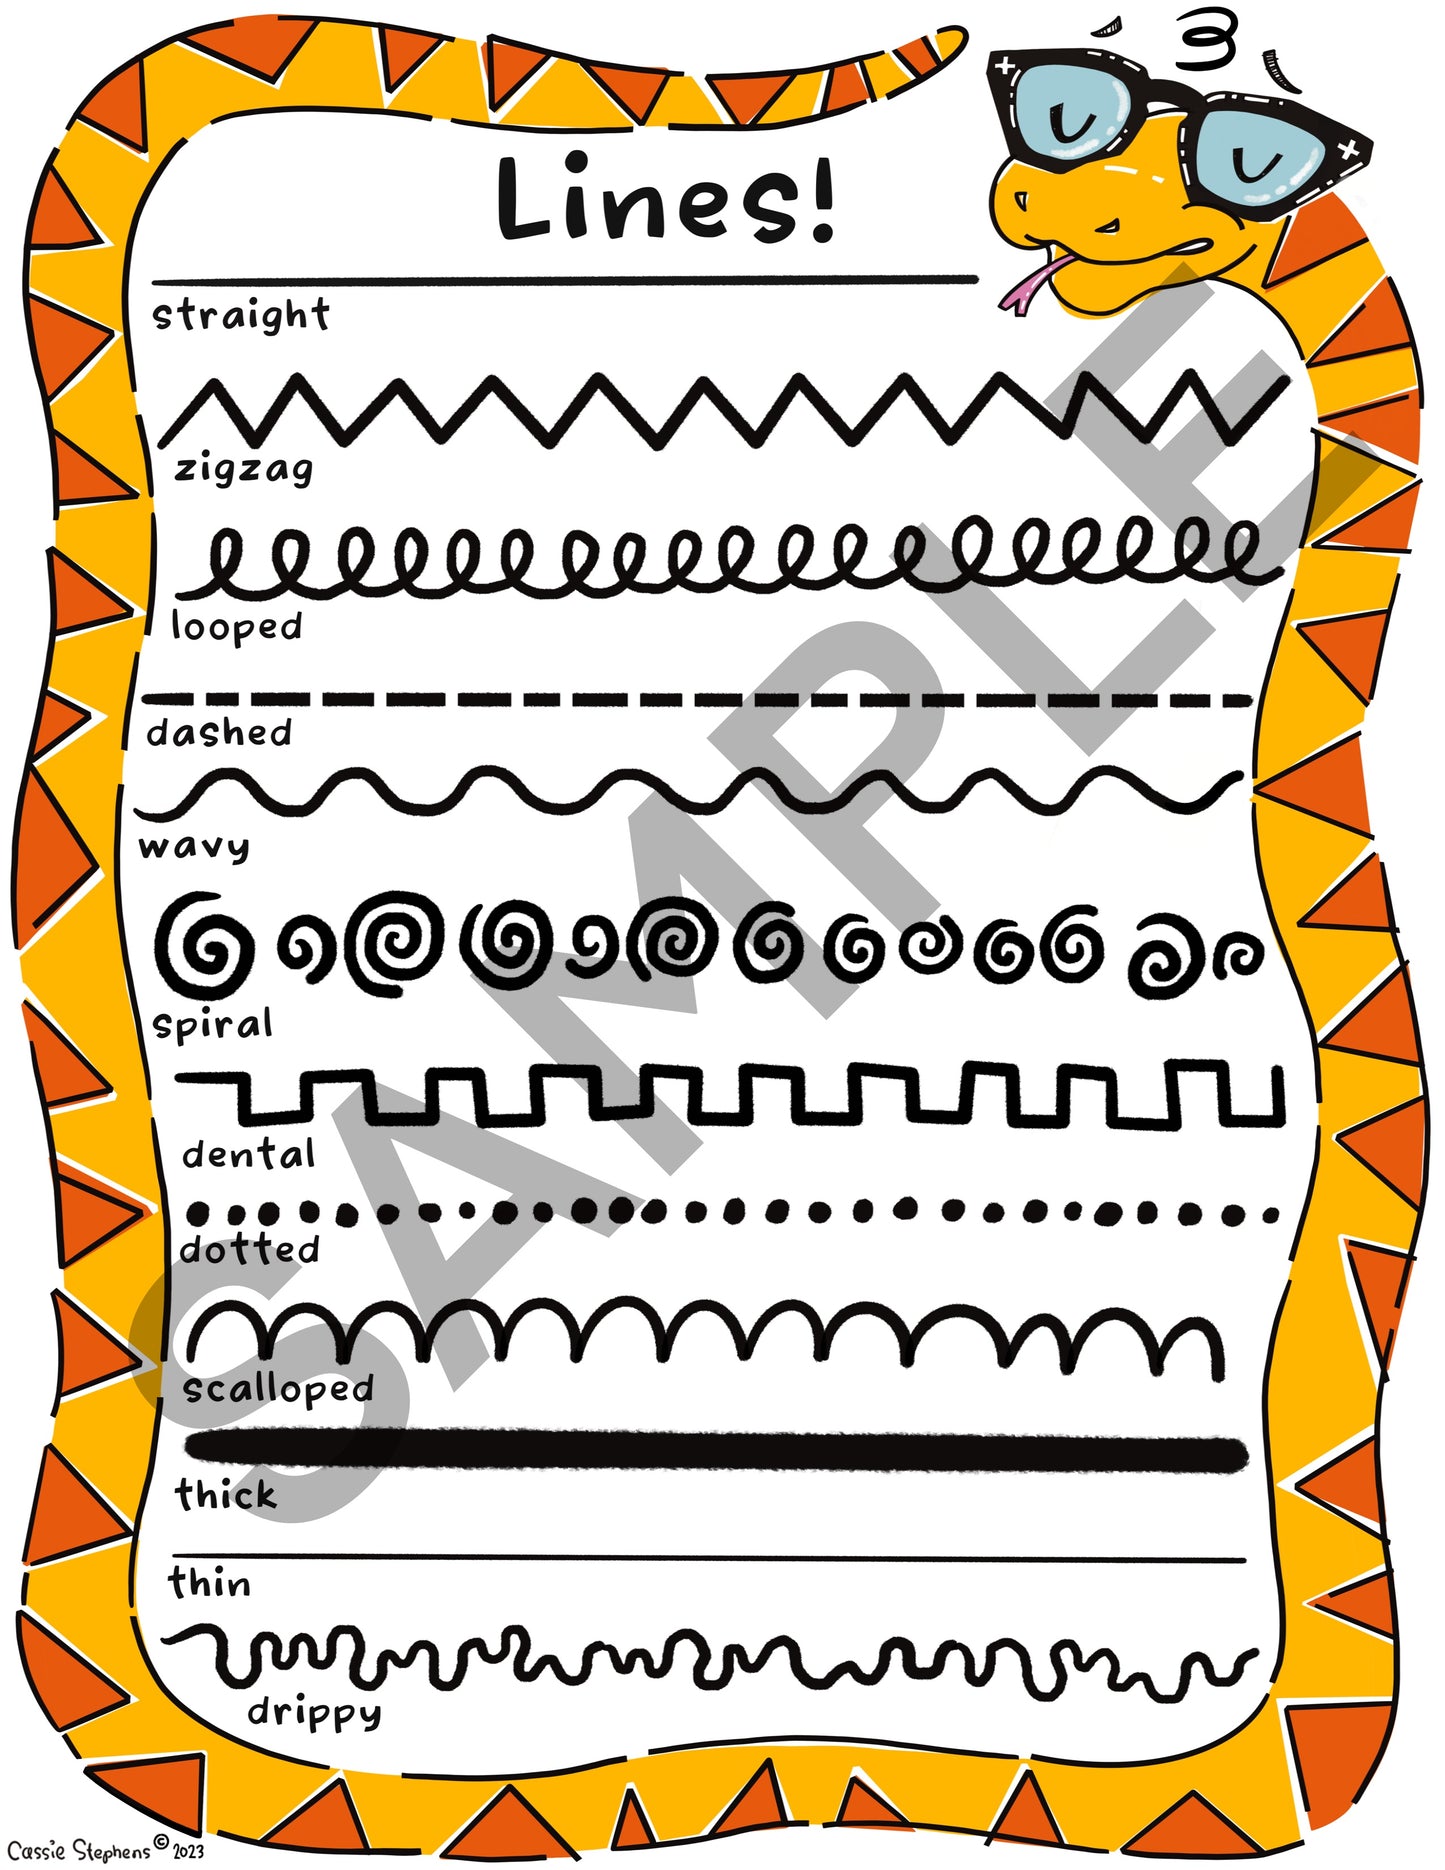 Larry the Line, Posters and Printouts Bundle, Digital Download